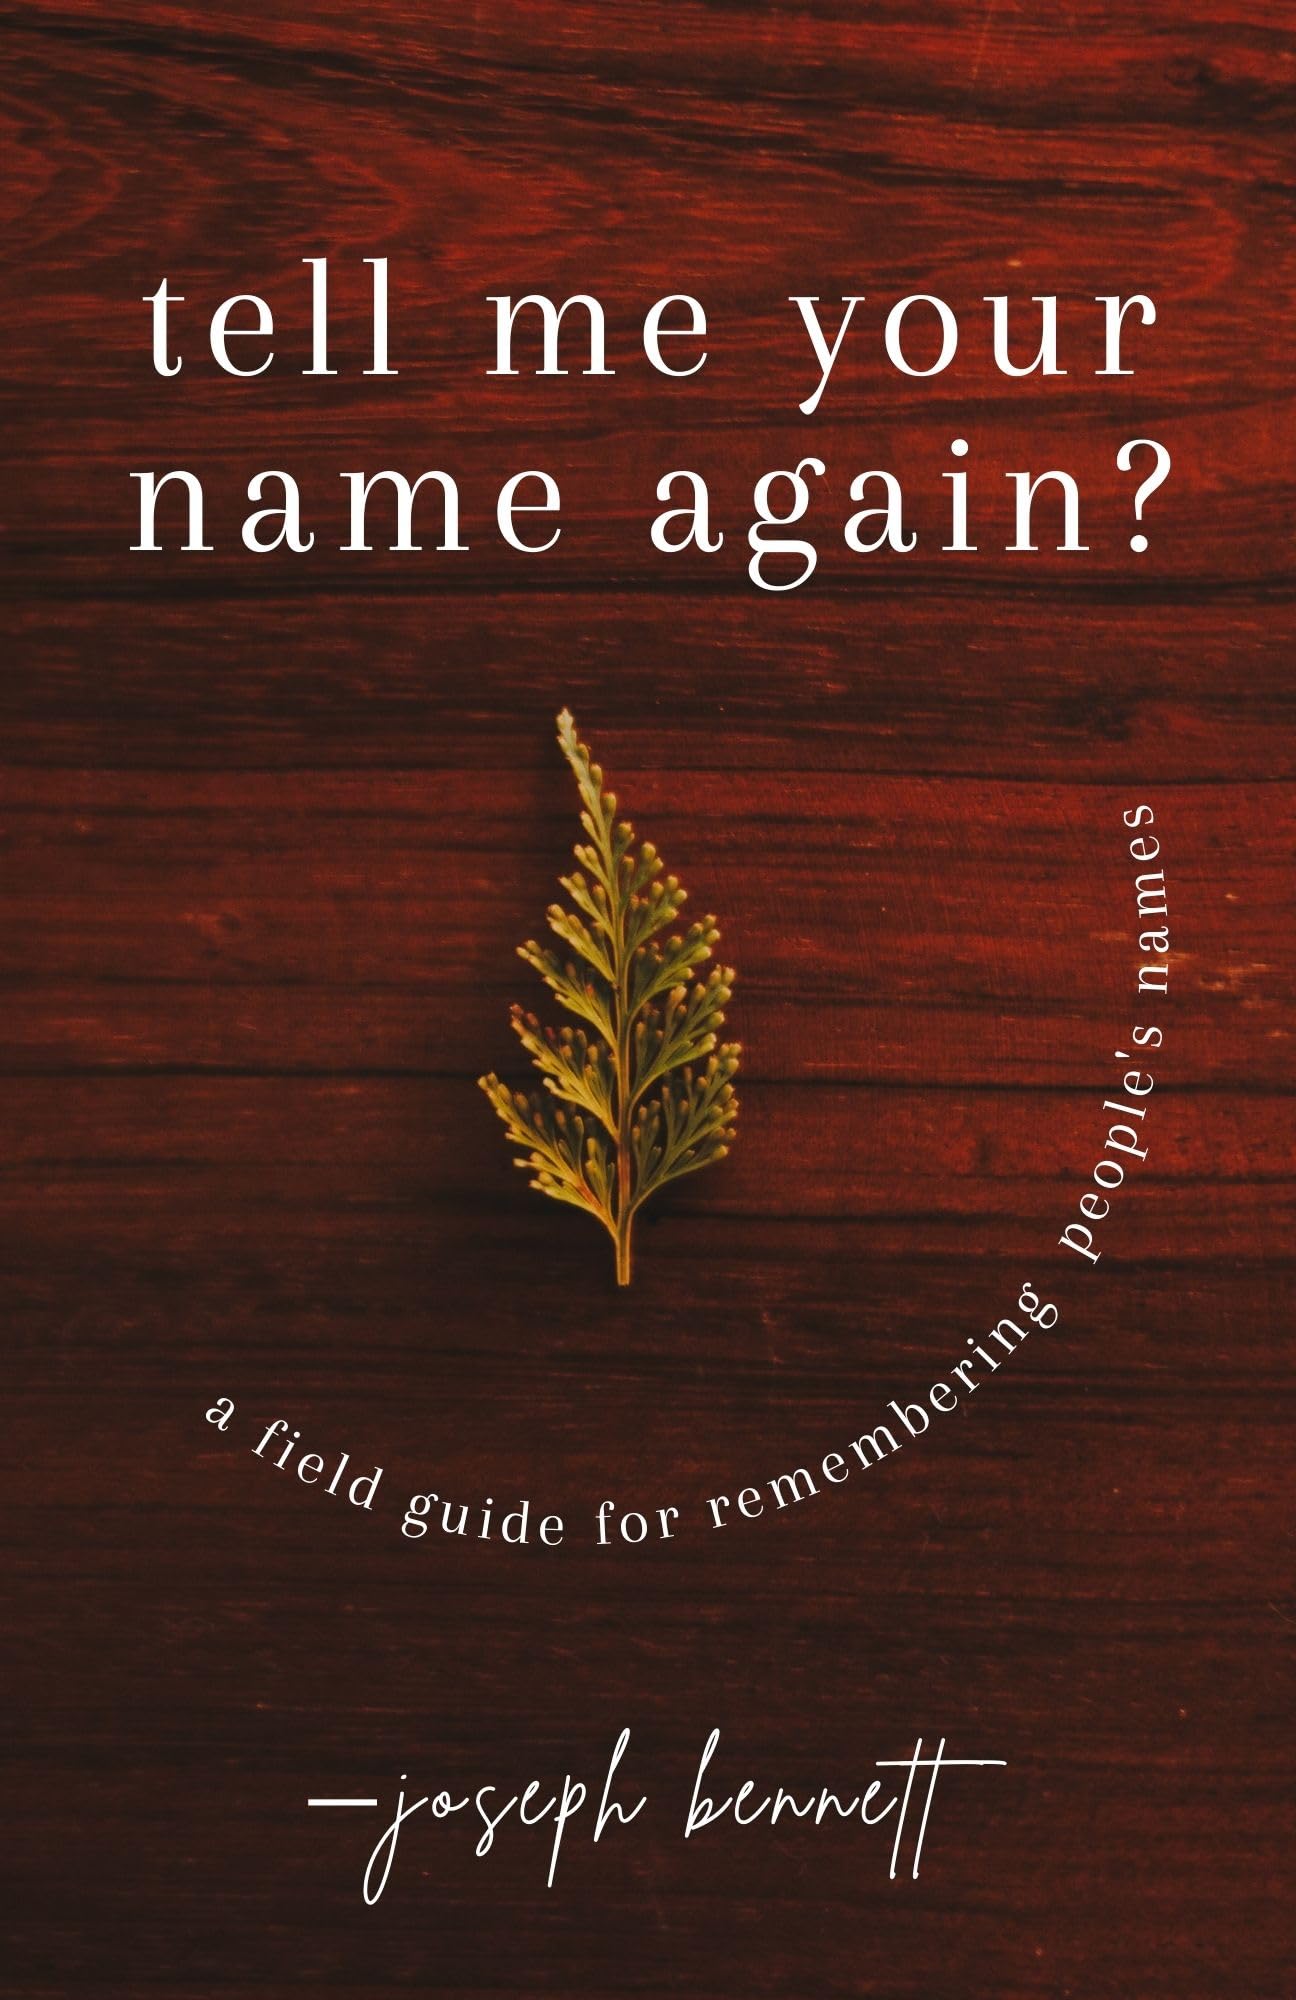 Tell Me Your Name Again?: A field guide for remembering people's names